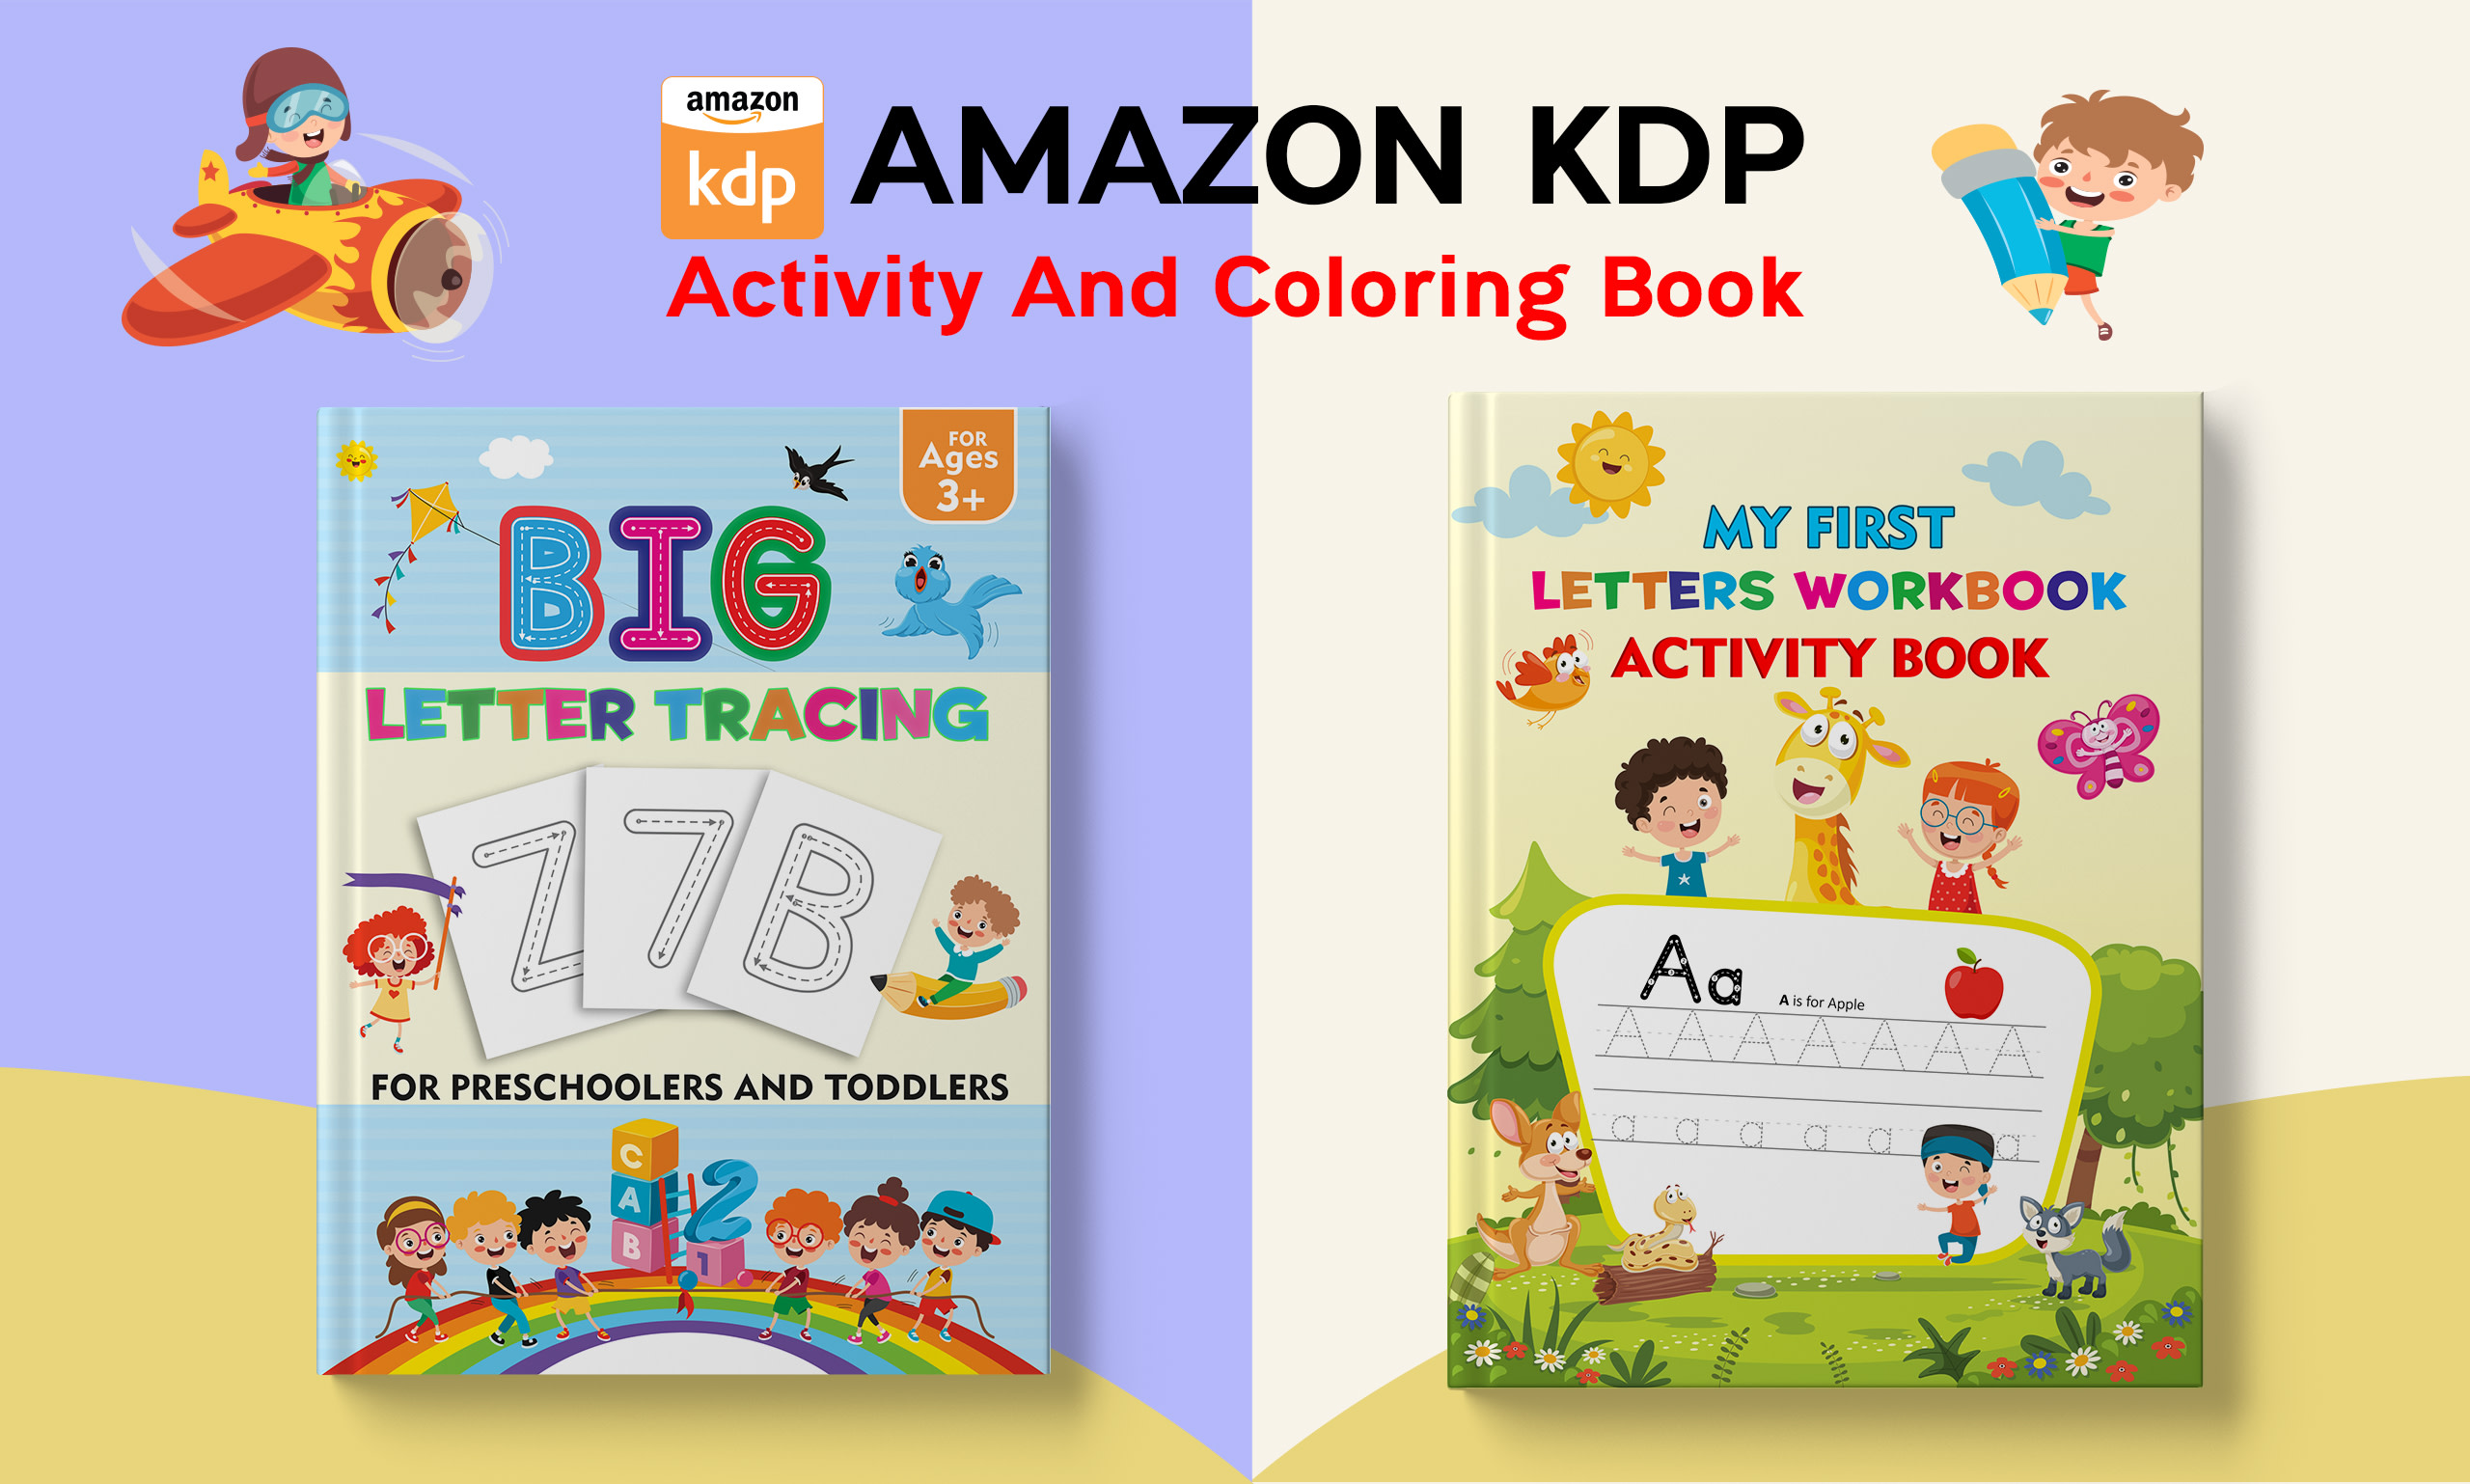 KDP coloring books, activity books, and cover designs for kids and adults